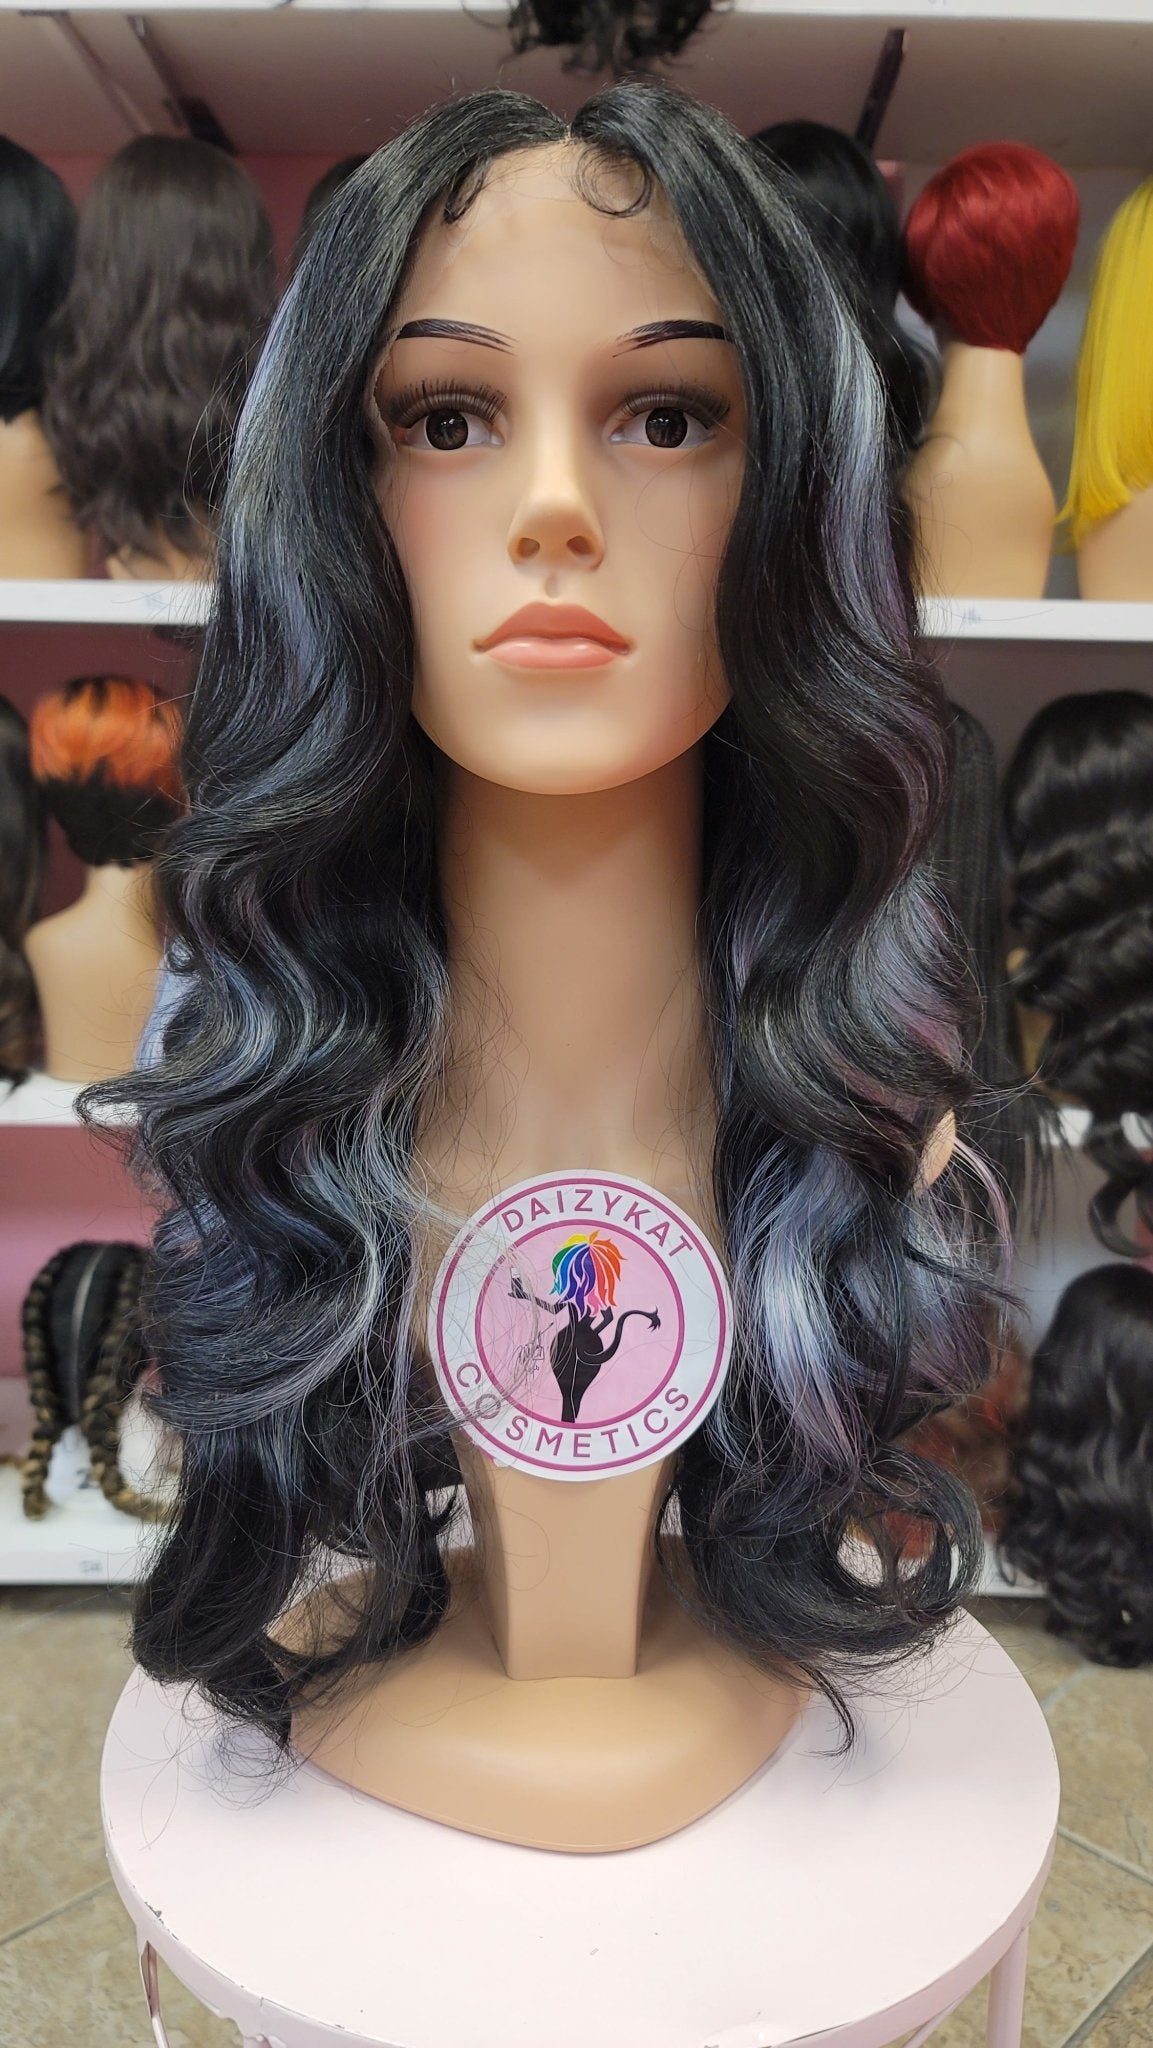 392 Jasmine - Middle Part Lace Front Wig - 1B/GREY - DaizyKat Cosmetics 392 Jasmine - Middle Part Lace Front Wig - 1B/GREY DaizyKat Cosmetics Wigs